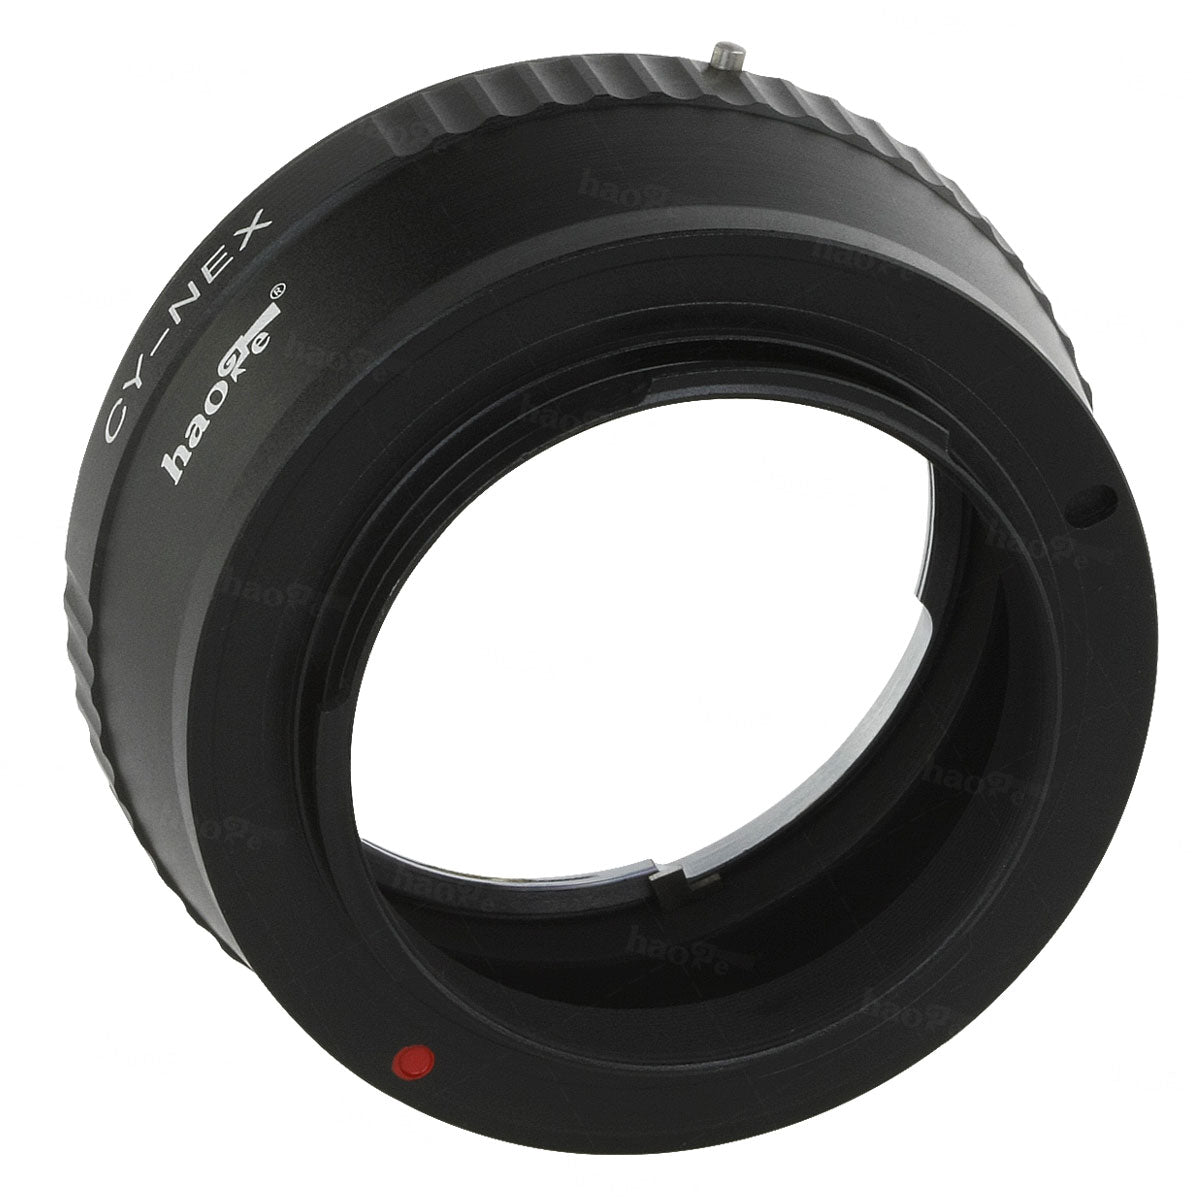 Haoge Lens Mount Adapter for Contax Yashica C/Y CY Mount Lens to Sony E-mount NEX Camera such as NEX-3, NEX-5, NEX-5N, NEX-7, NEX-7N, NEX-C3, NEX-F3, a6300, a6000, a5000, a3500, a3000, NEX-VG10, VG20